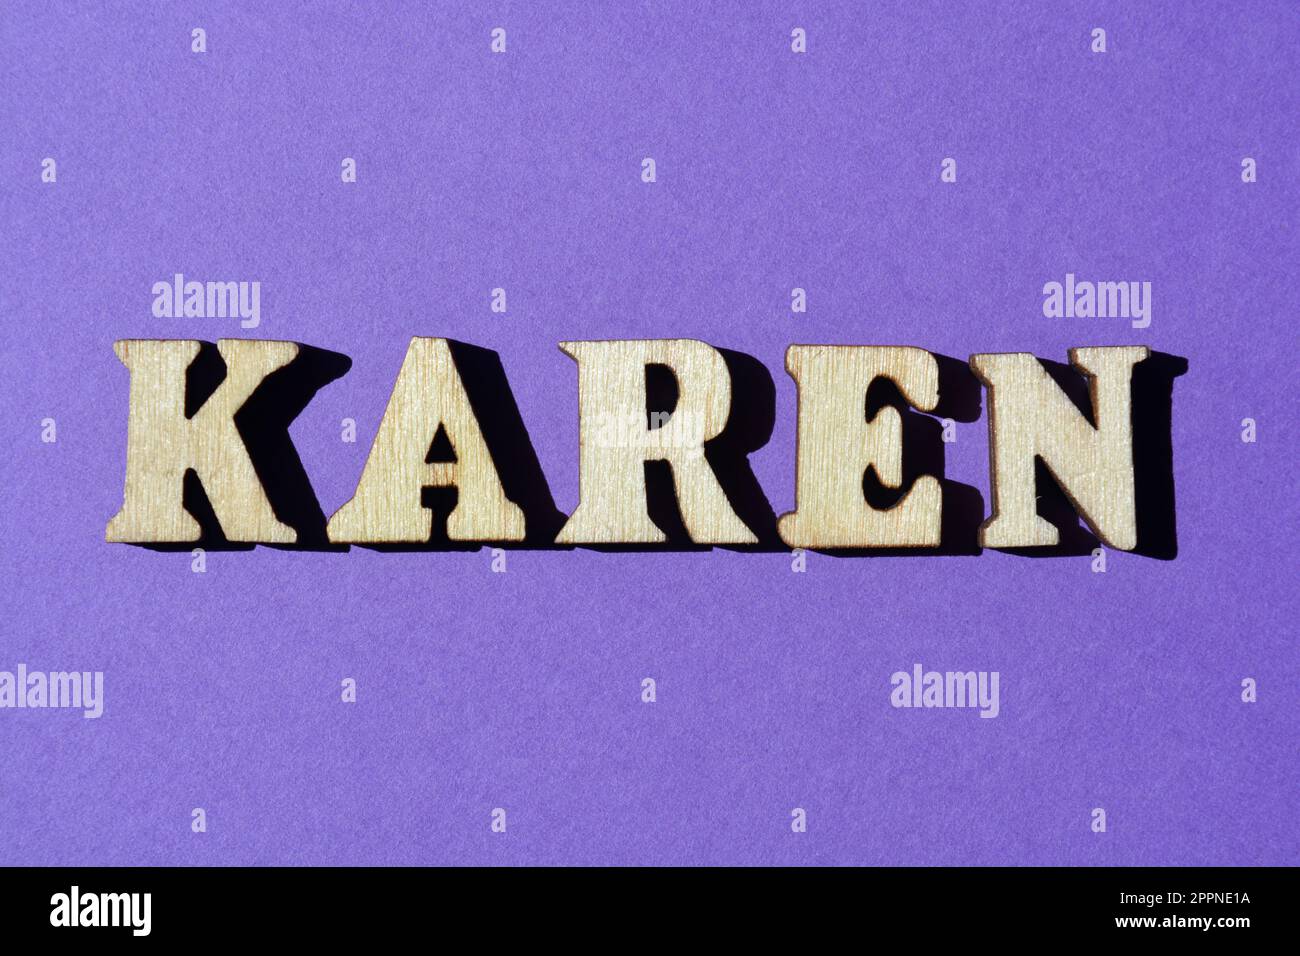 Karen, word in wooden alphabet letters isolated on purple background Stock Photo